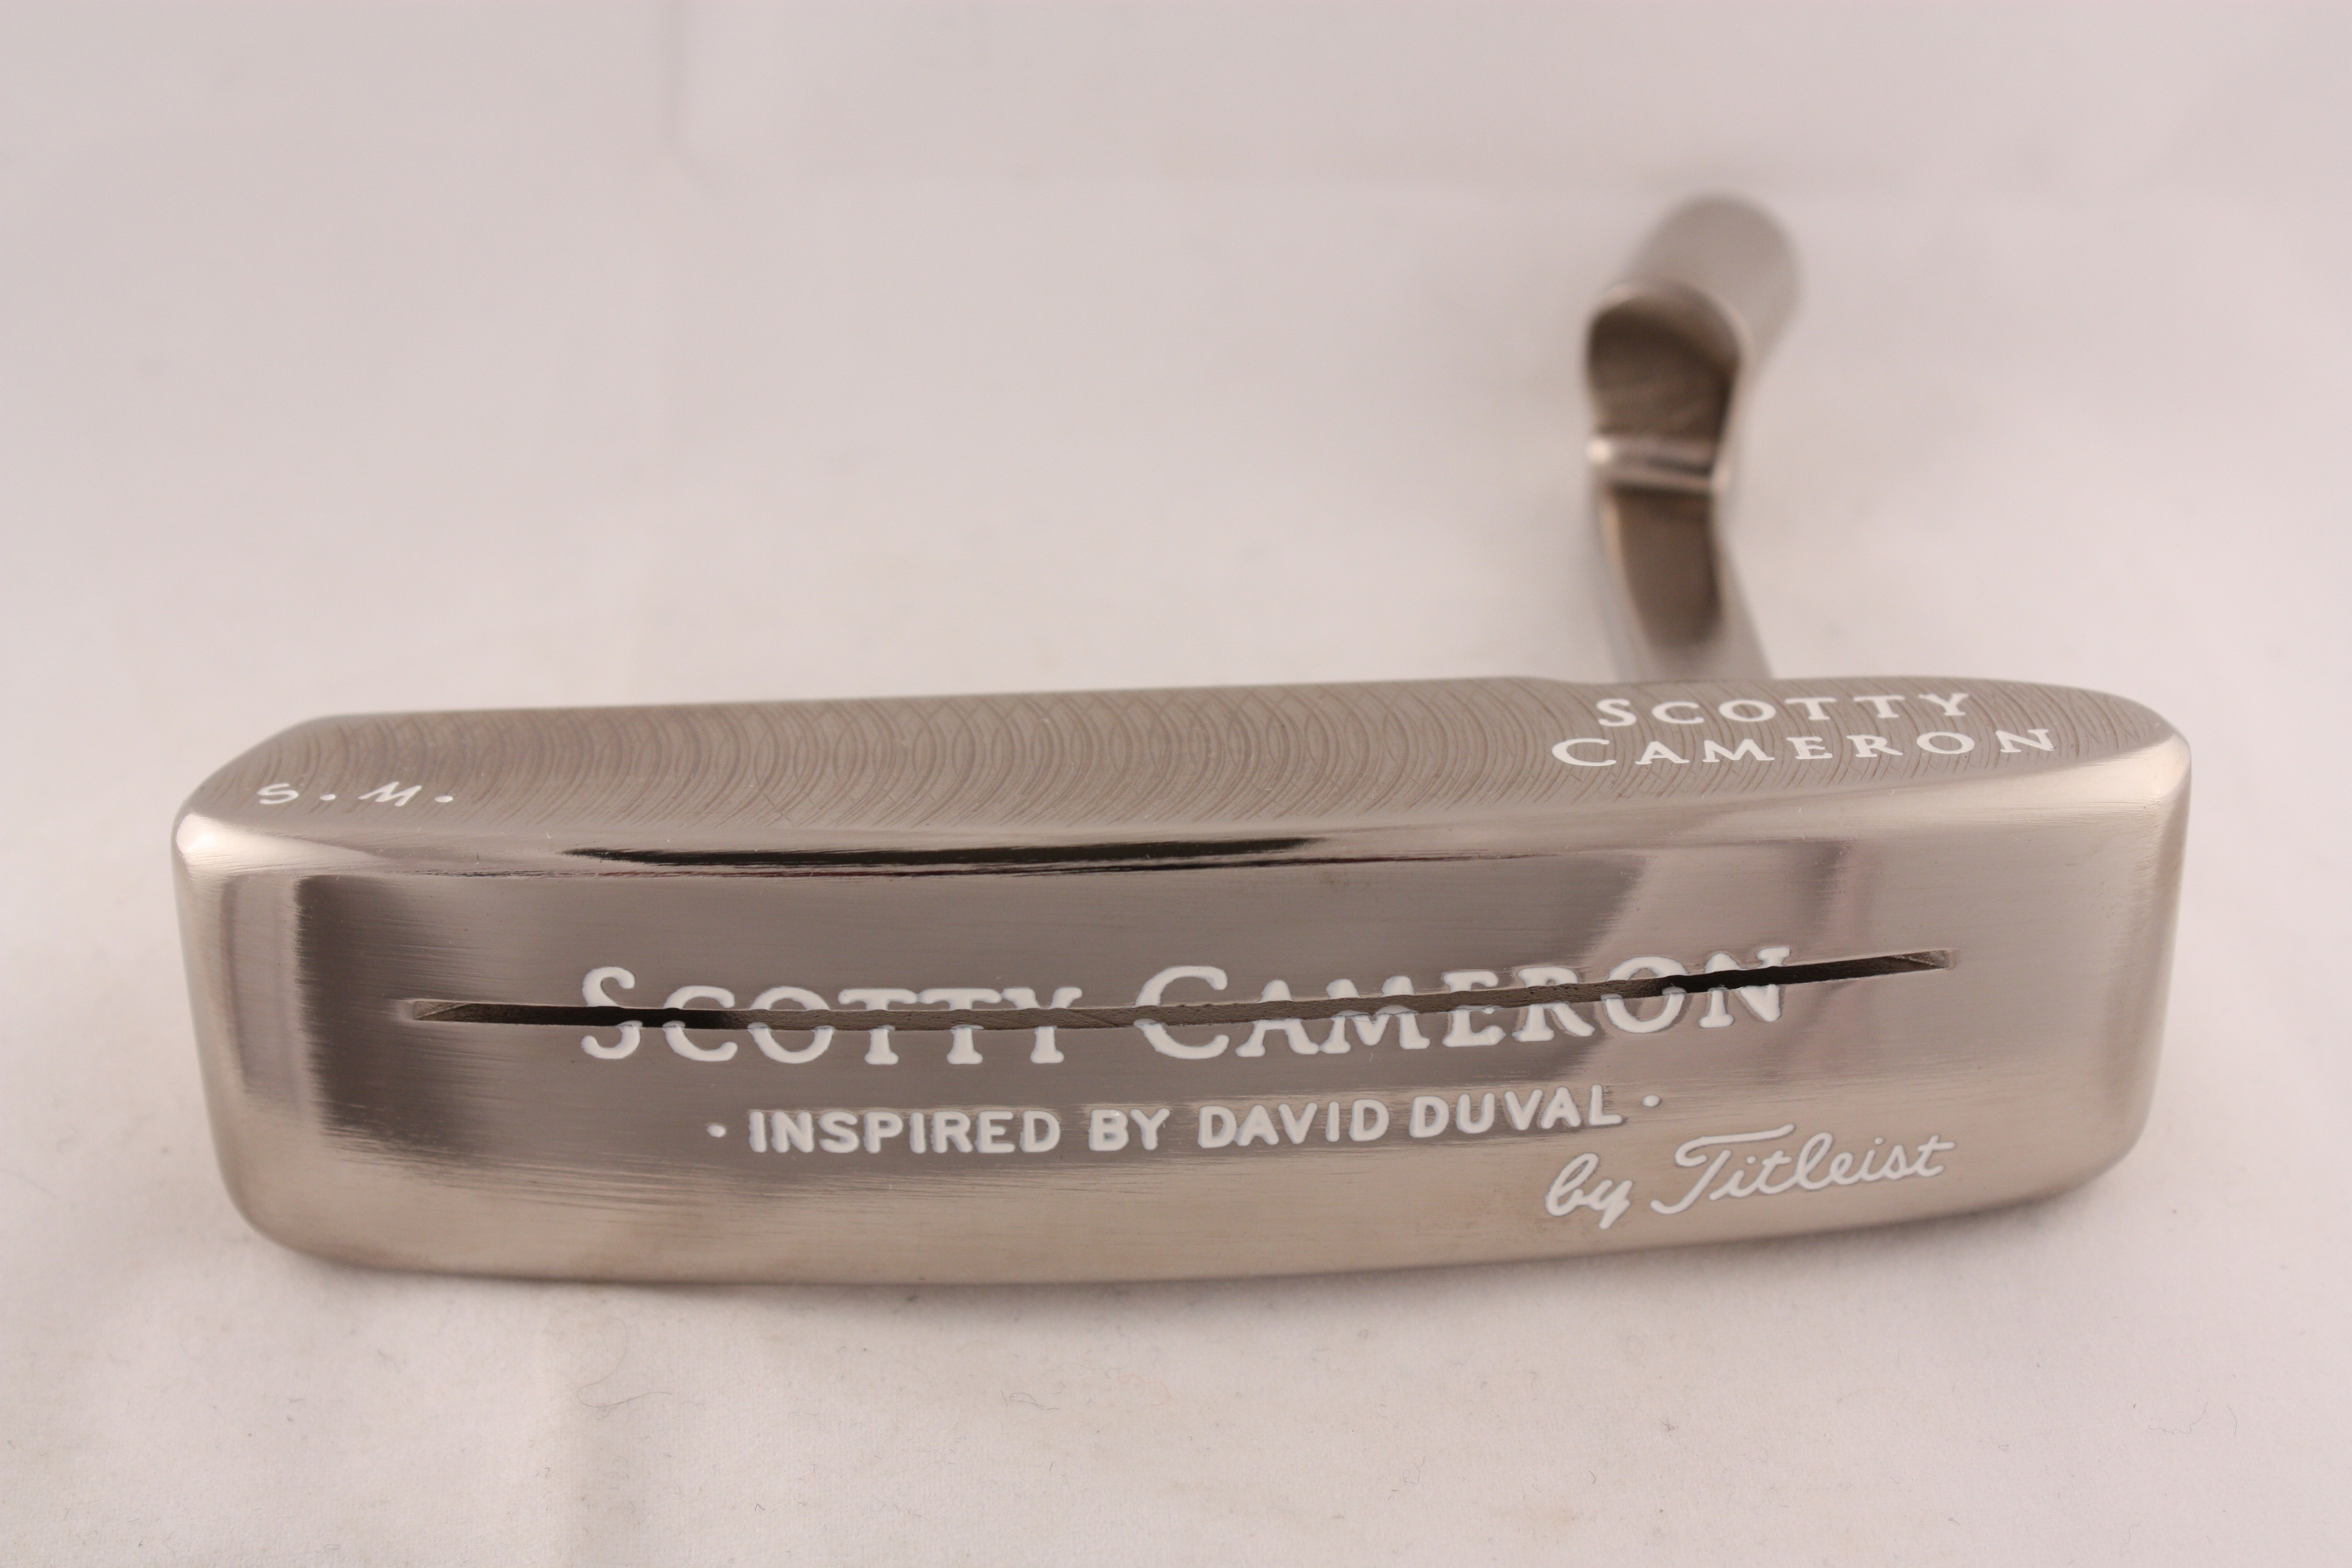 scotty-cameron-inspired-by-david-duval-5370 -